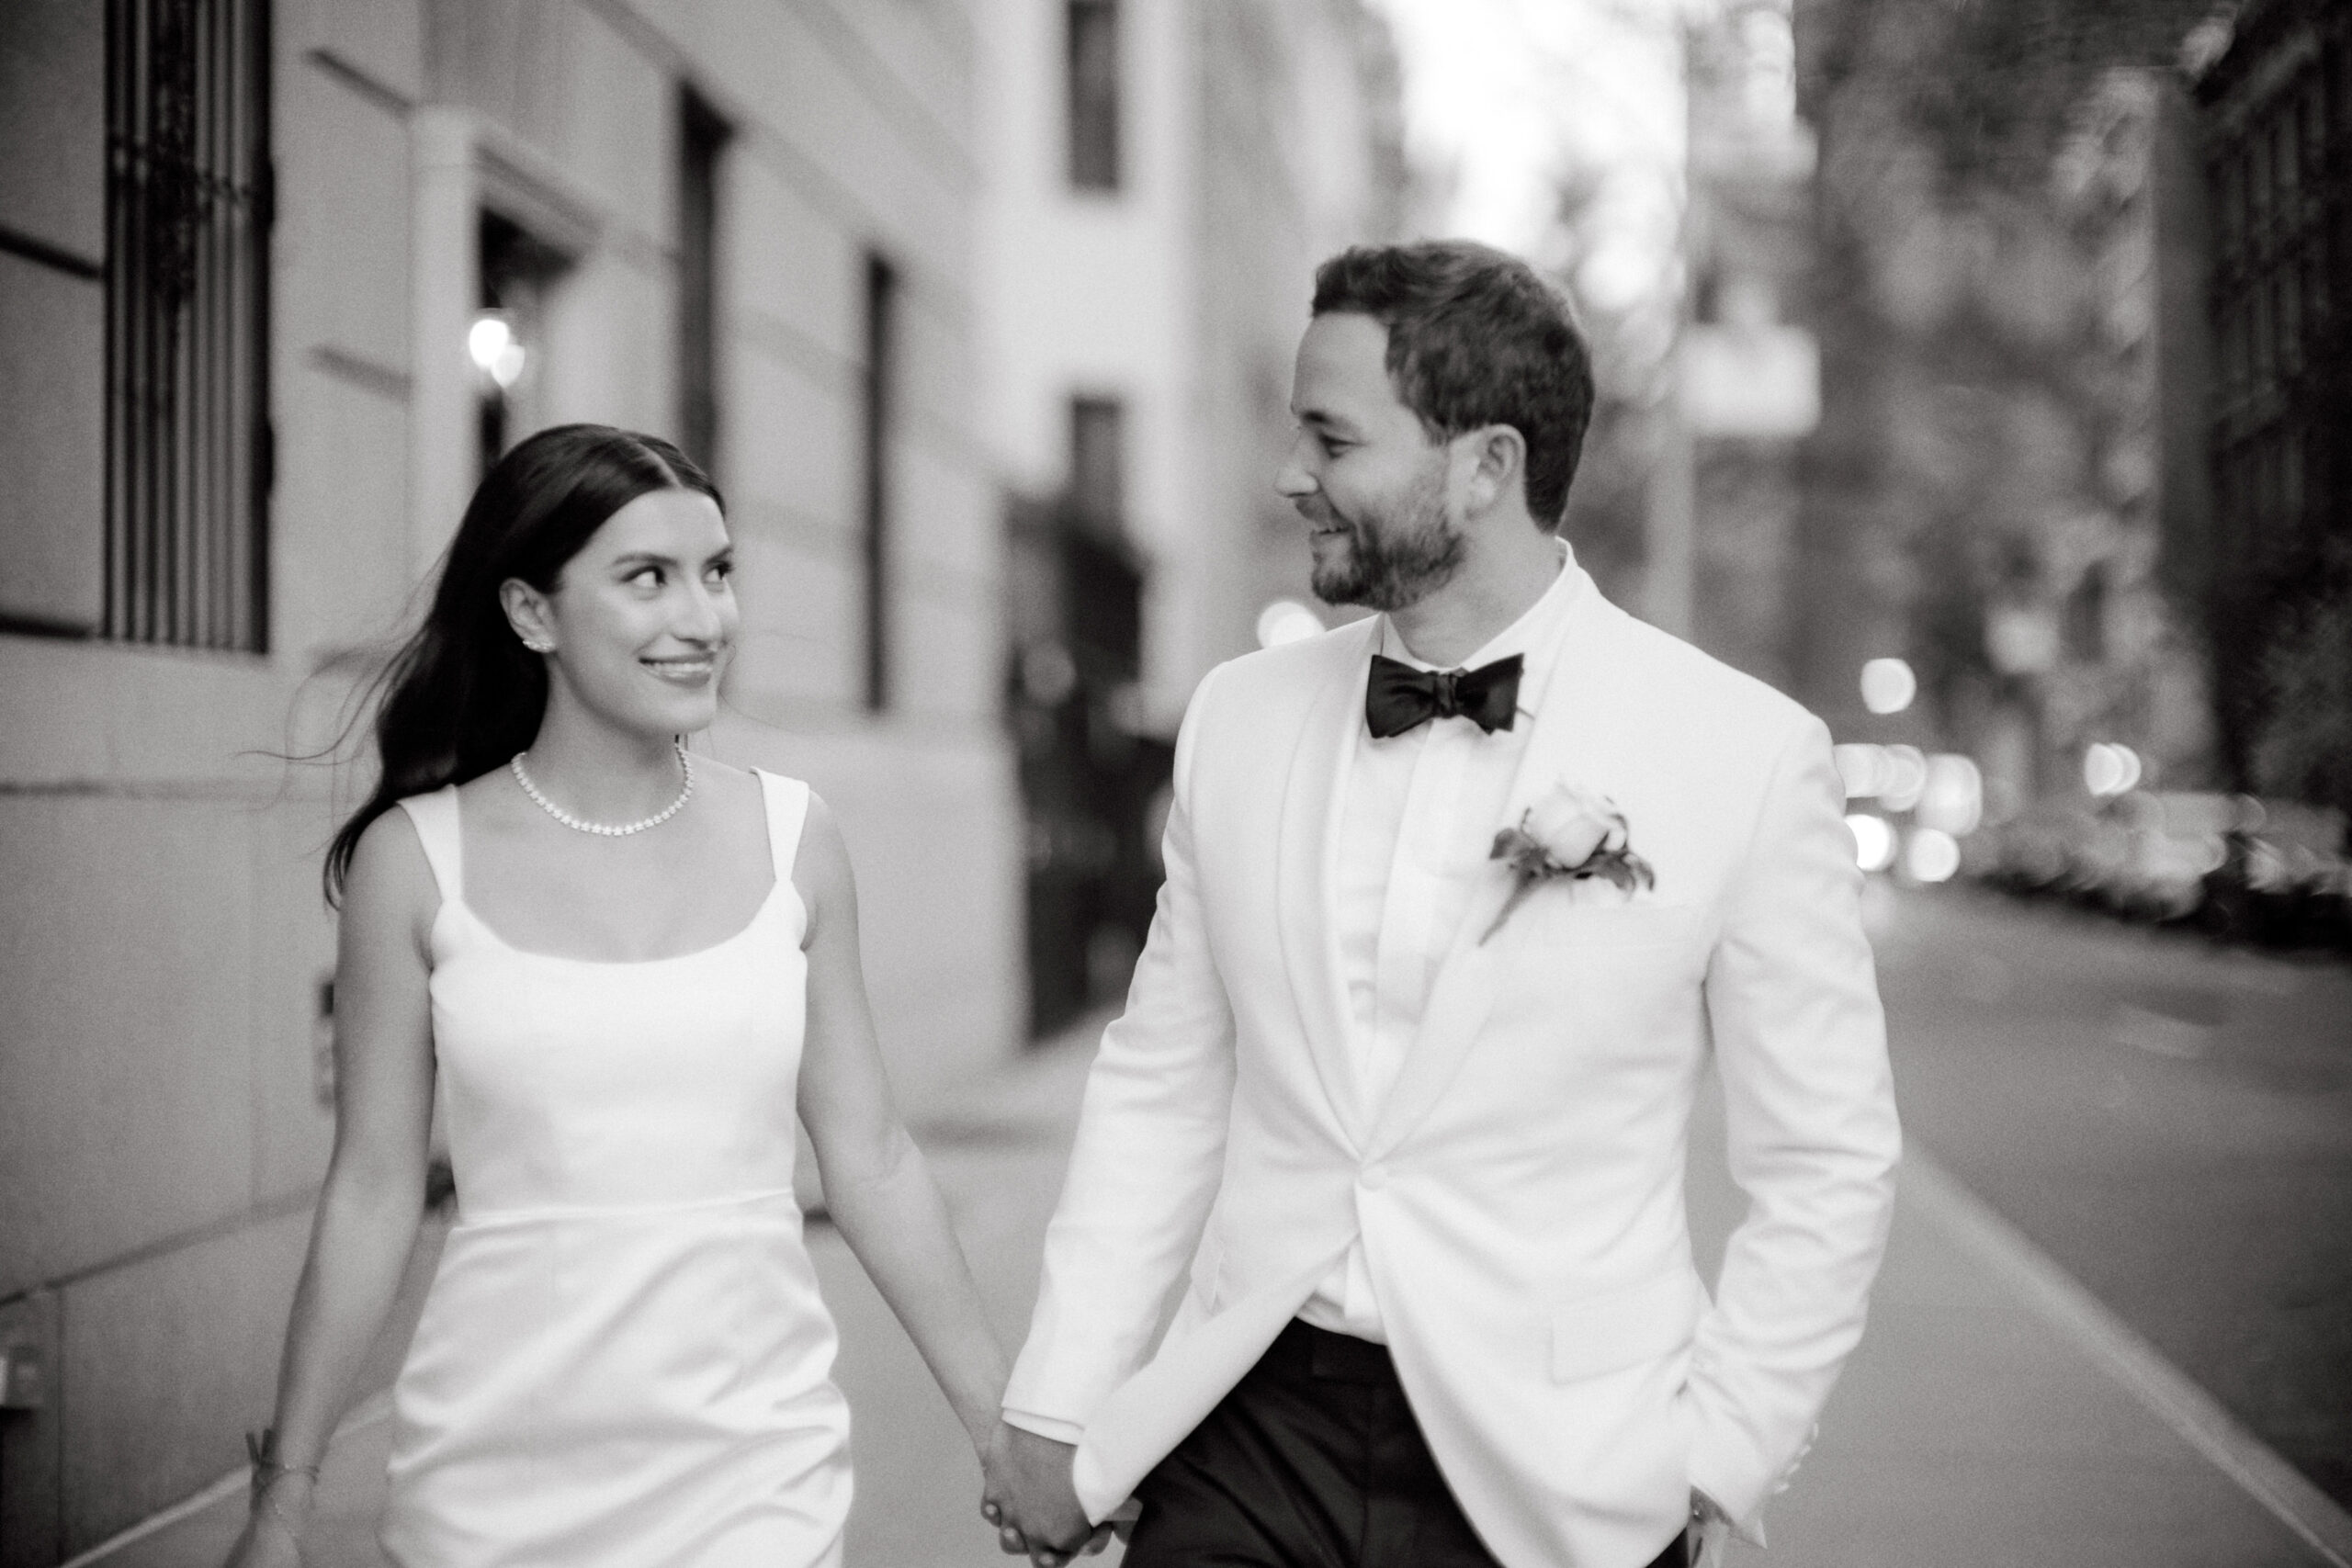 The newly-weds are happily walking the streets of New York City. Image by Jenny Fu Studio